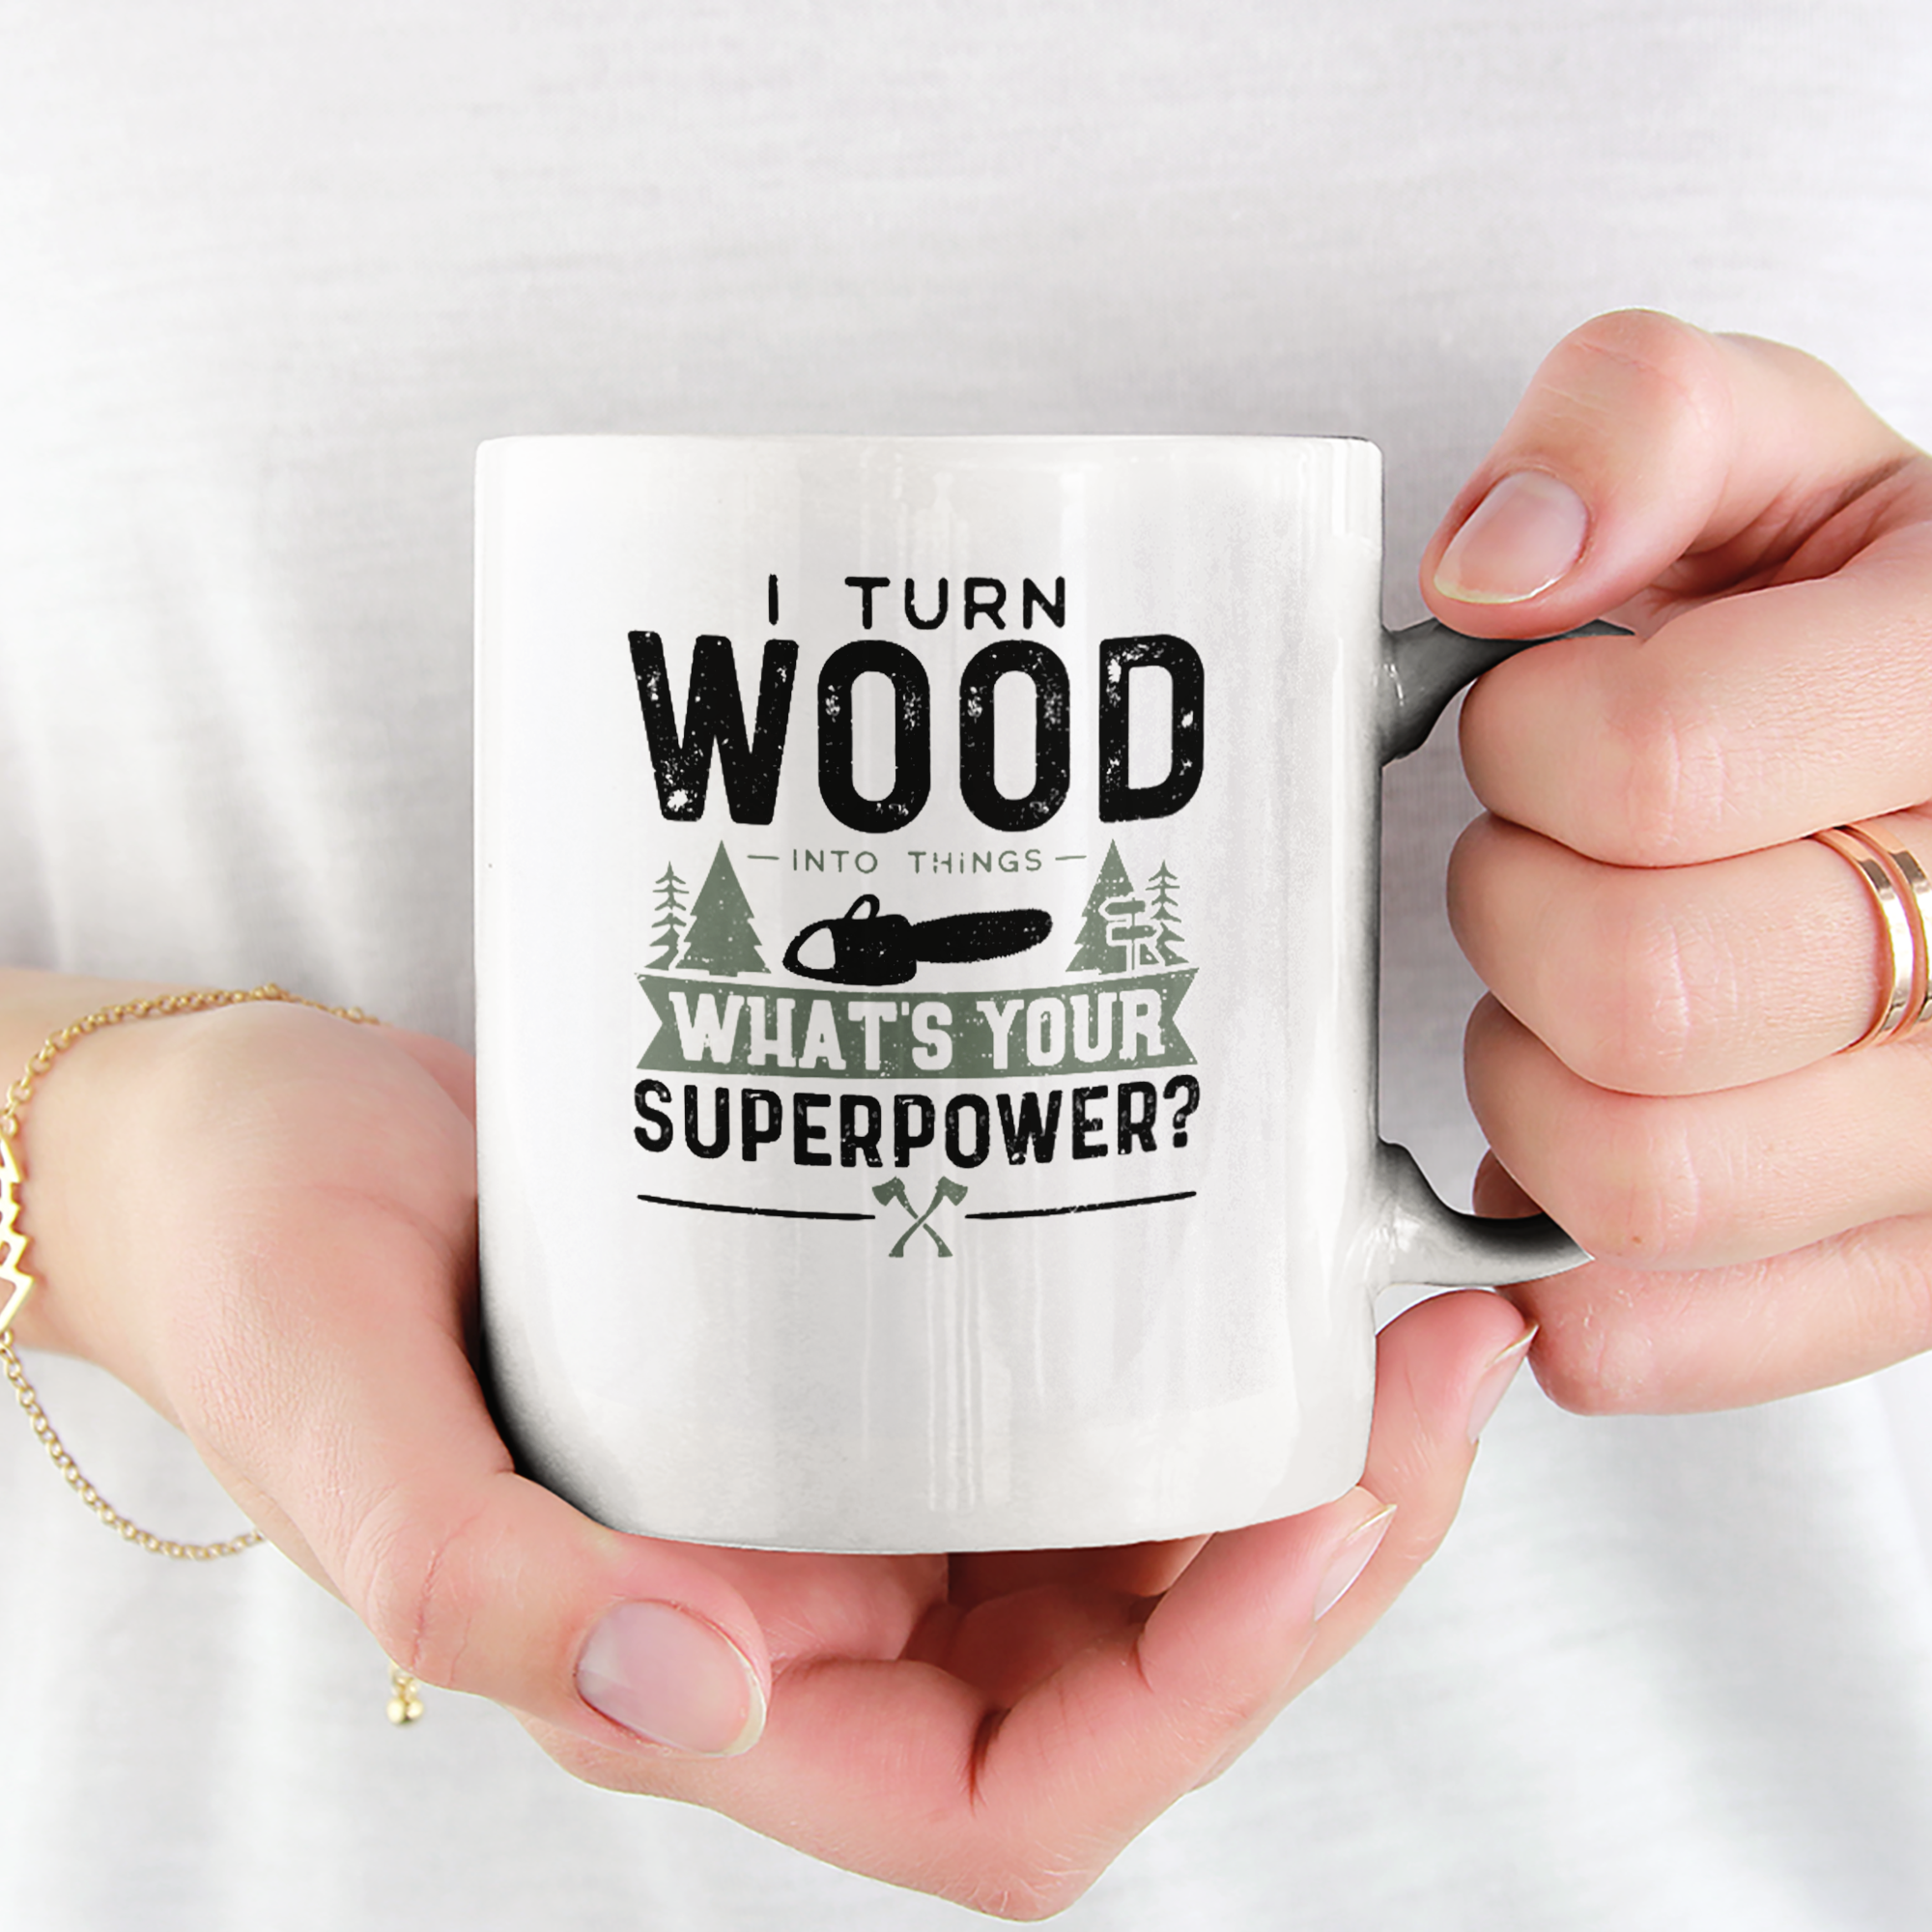 I Turn Wood Into Things What's Your Superpower? Tasse - DESIGNSBYJNK5.COM